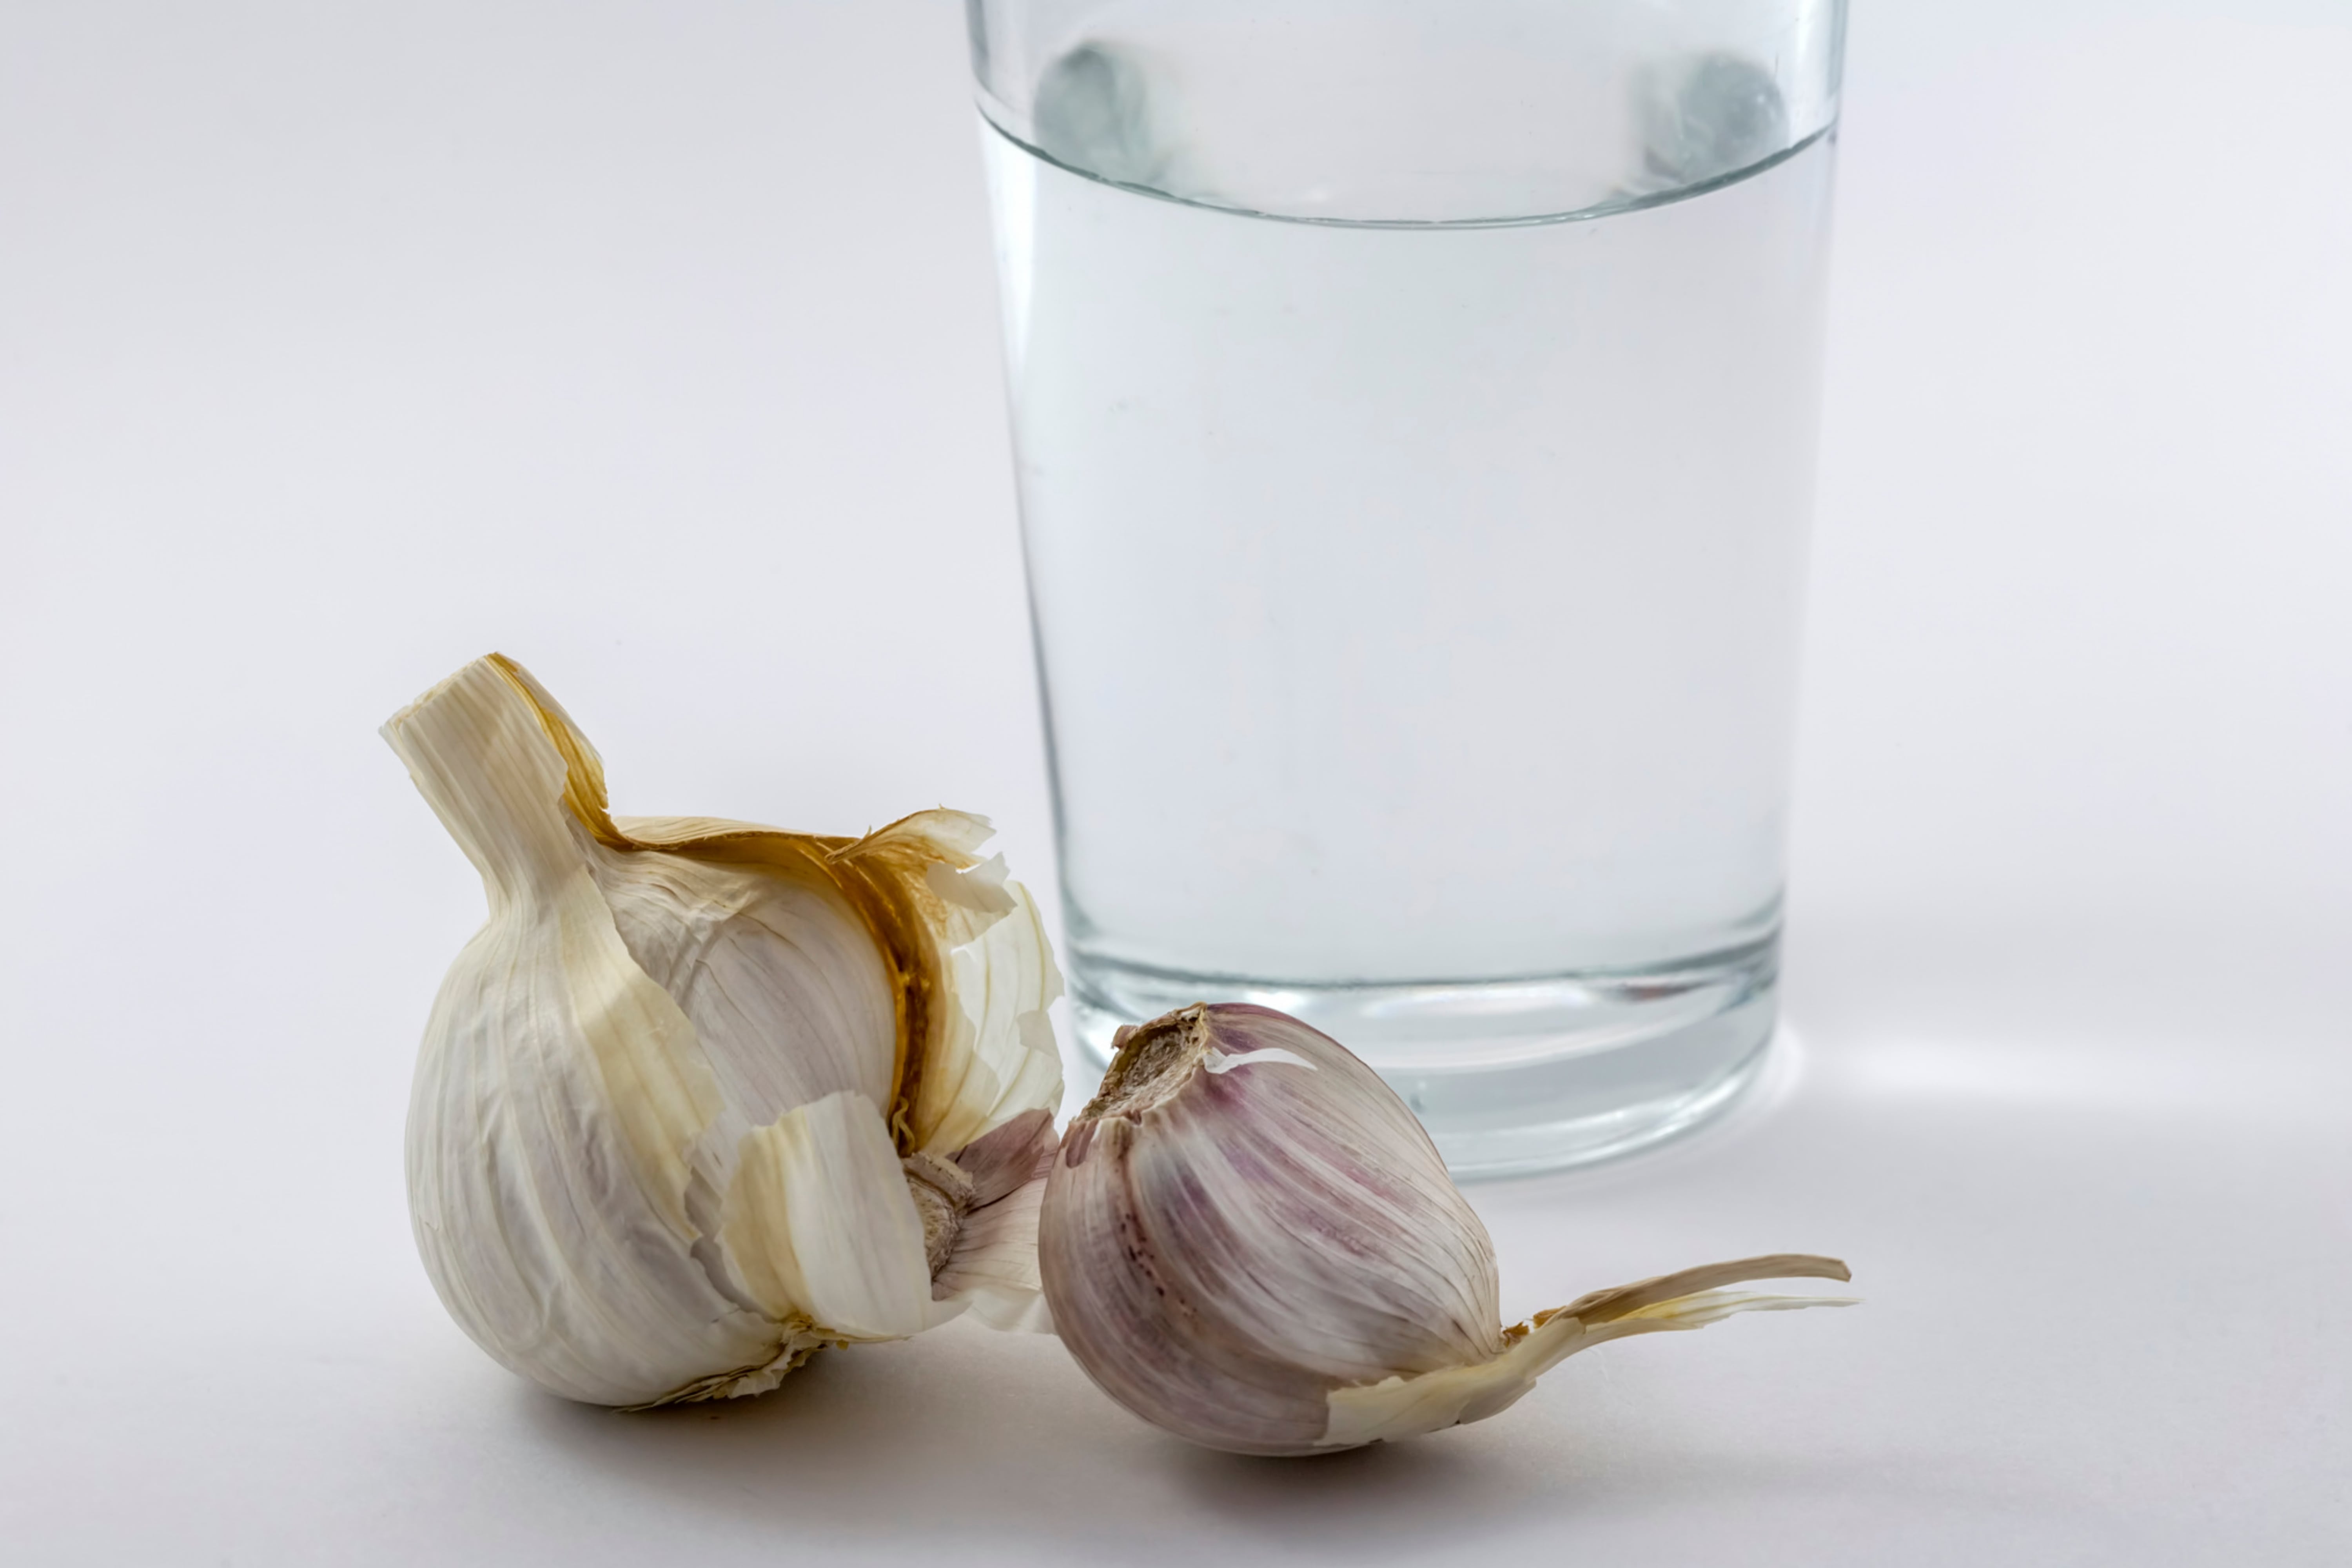 How to Make Garlic Water A Spicy Elixir for Your Health